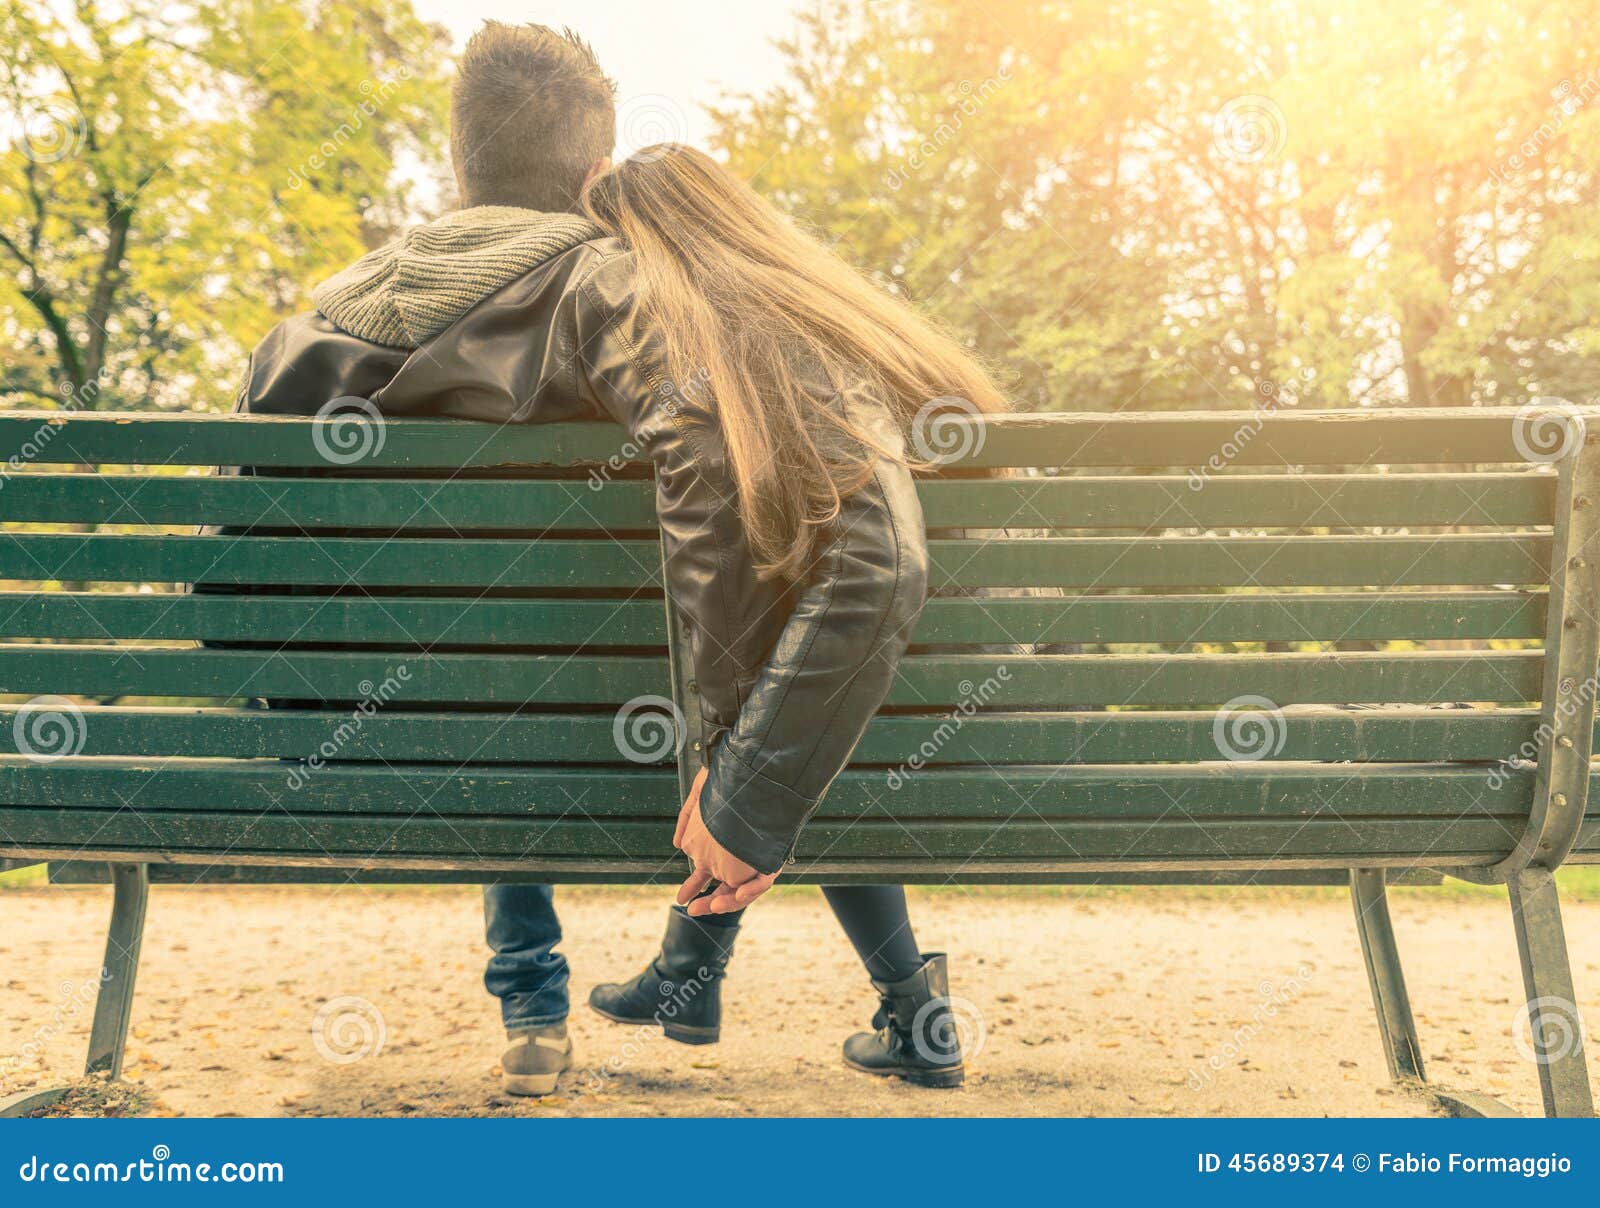 Couple In Love On A Bench Stock Photo - Image: 45689374